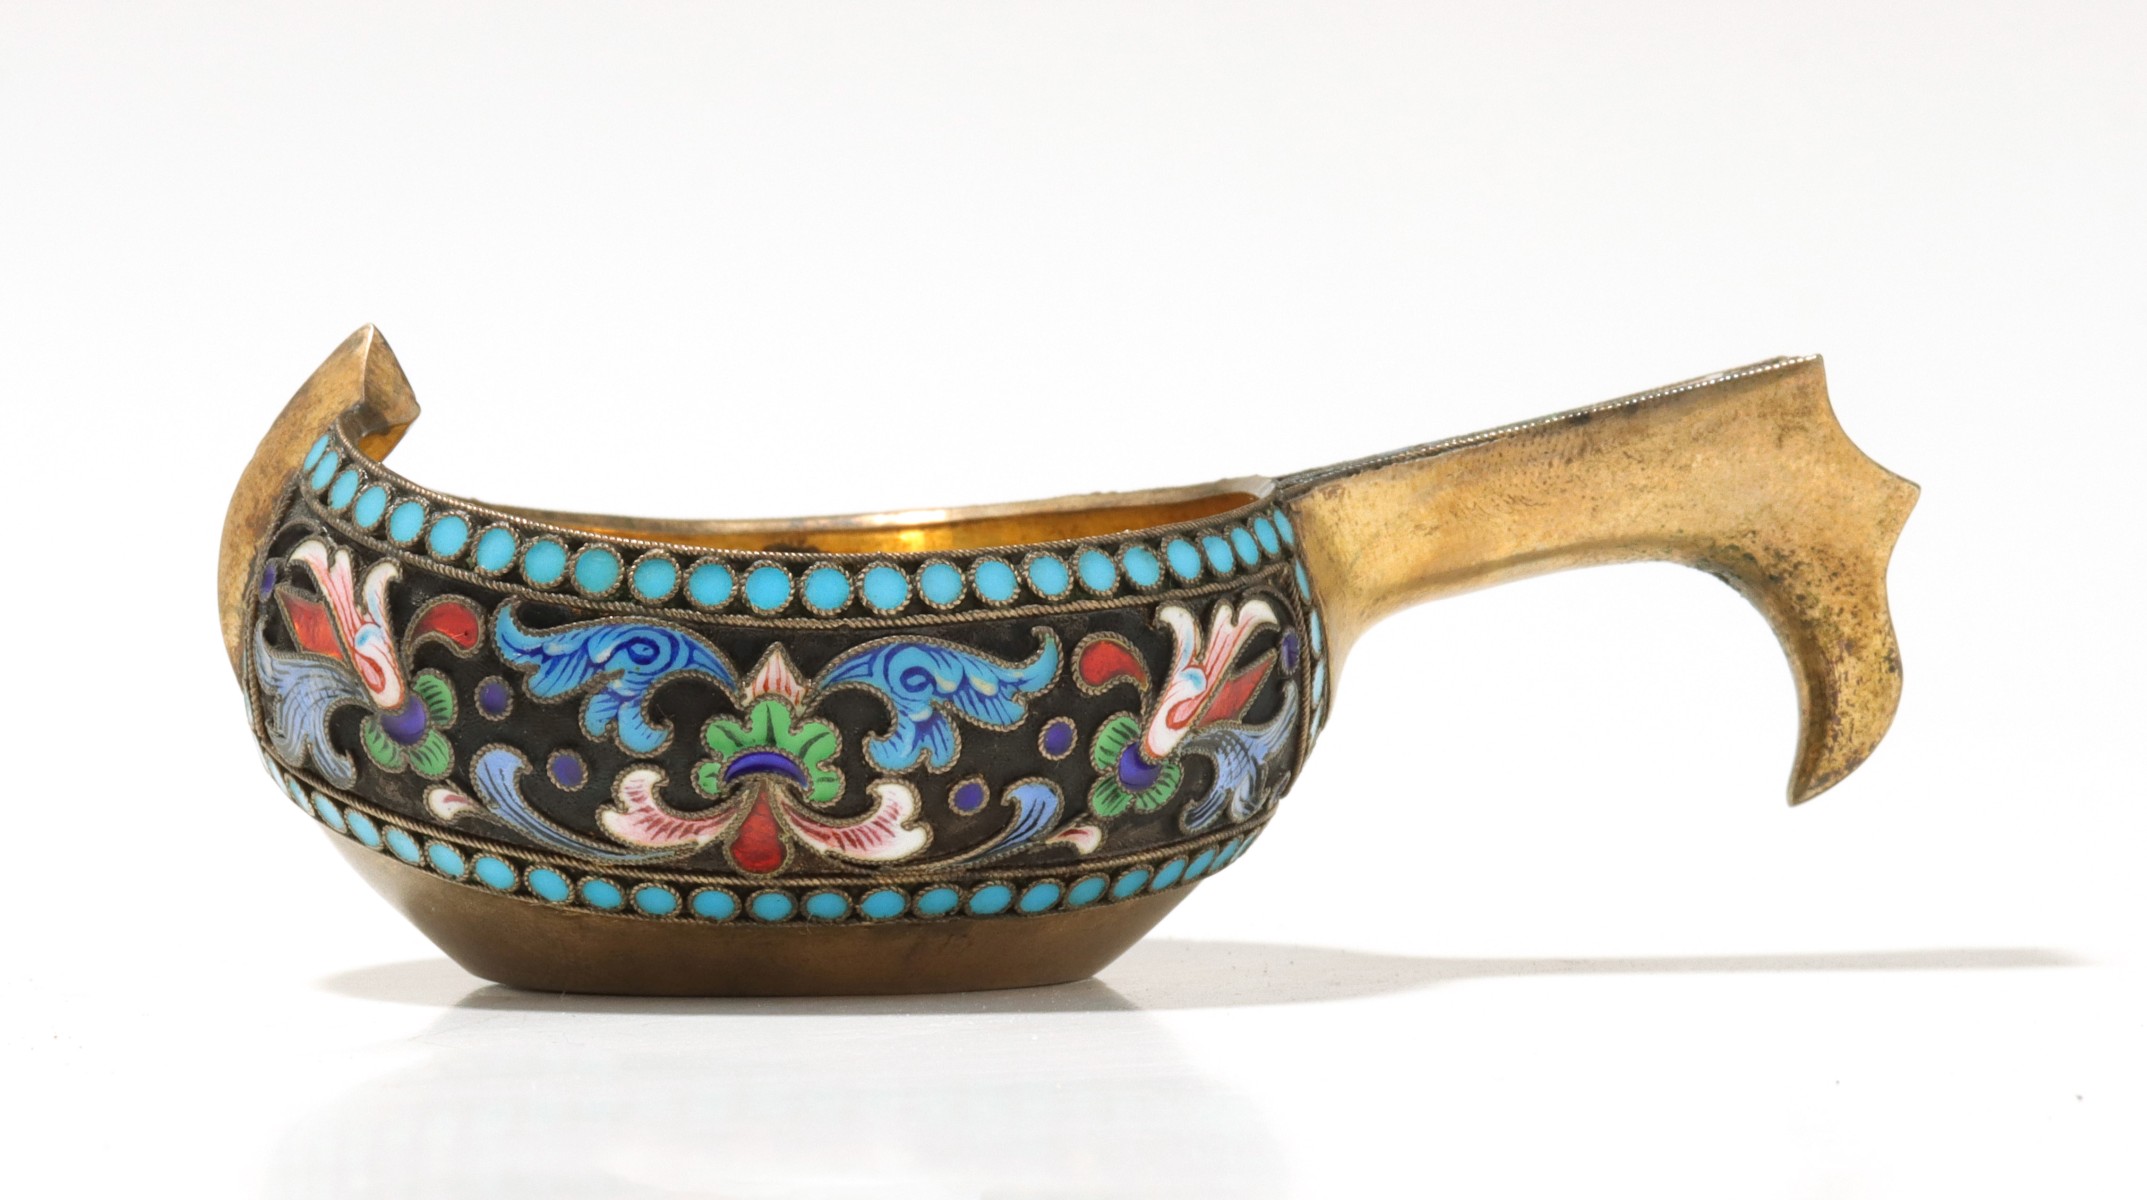 A FINE 1896 RUSSIAN SILVER-GILT AND CLOISONNE KOVSH